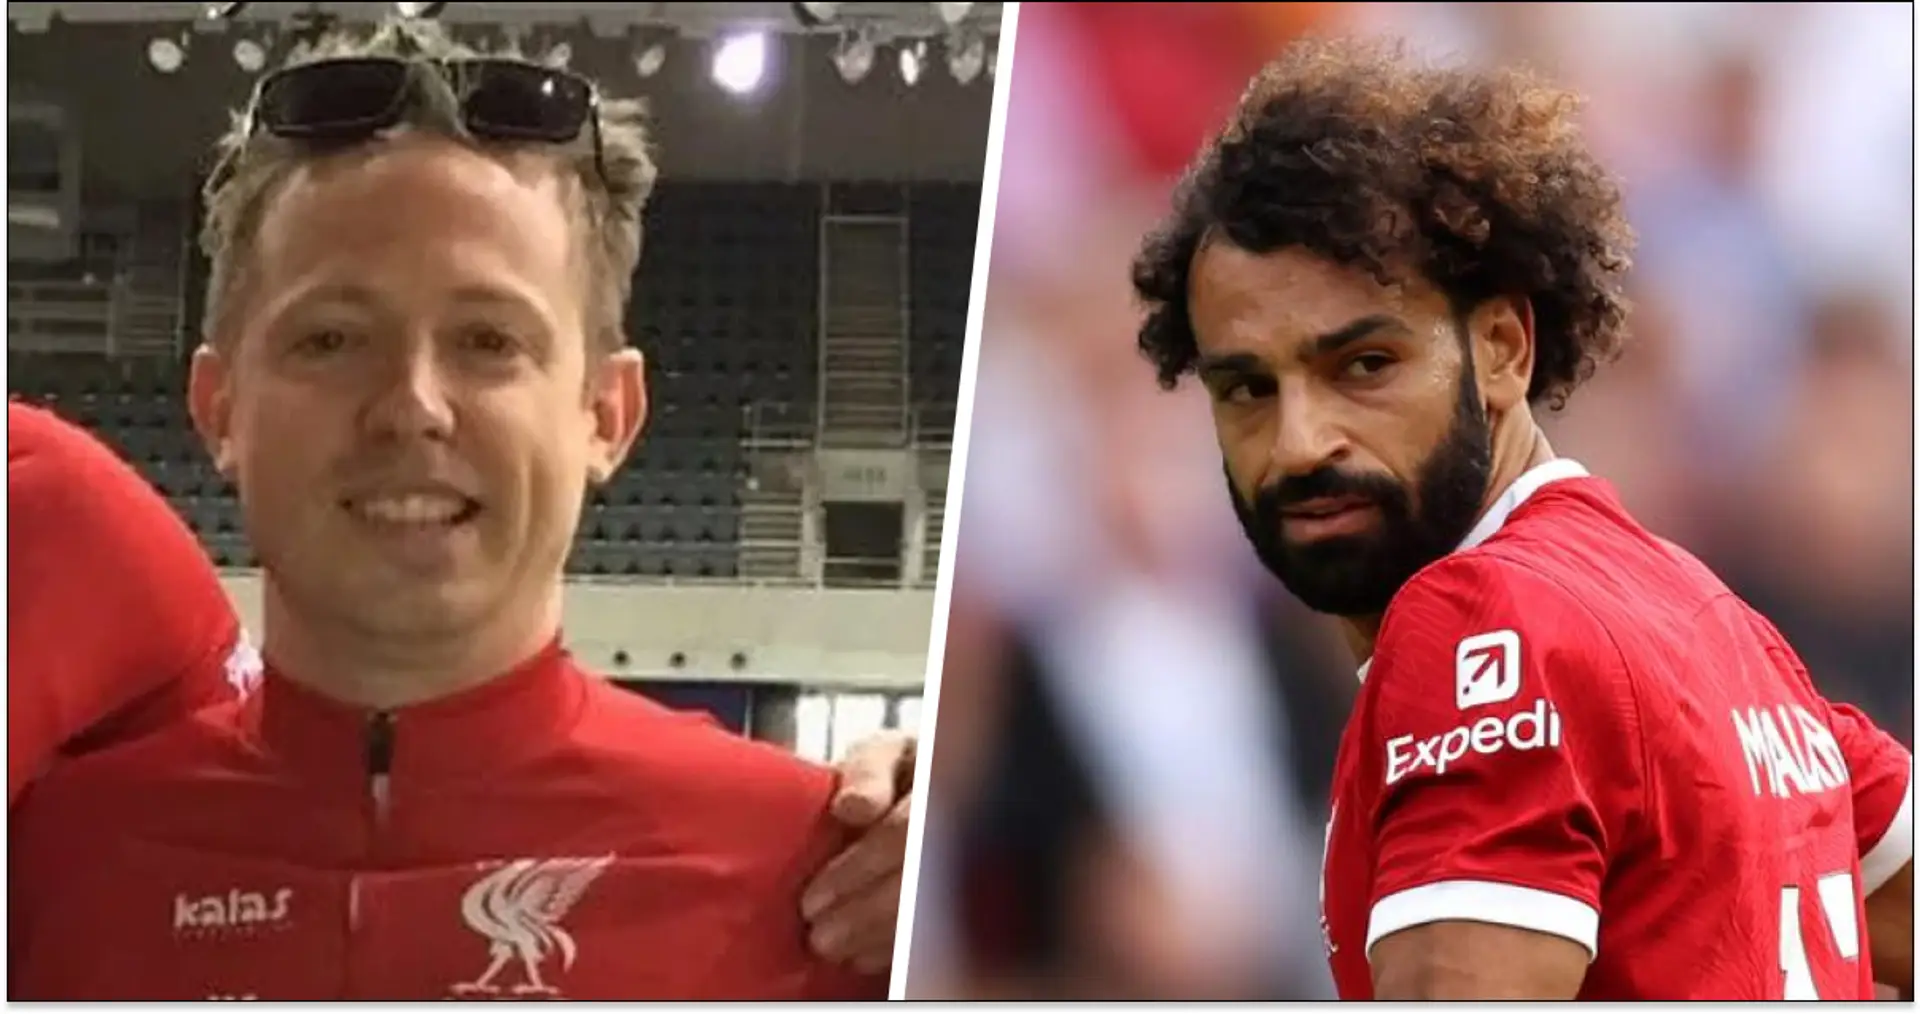 How much can Edwards realistically fetch for Salah this summer?